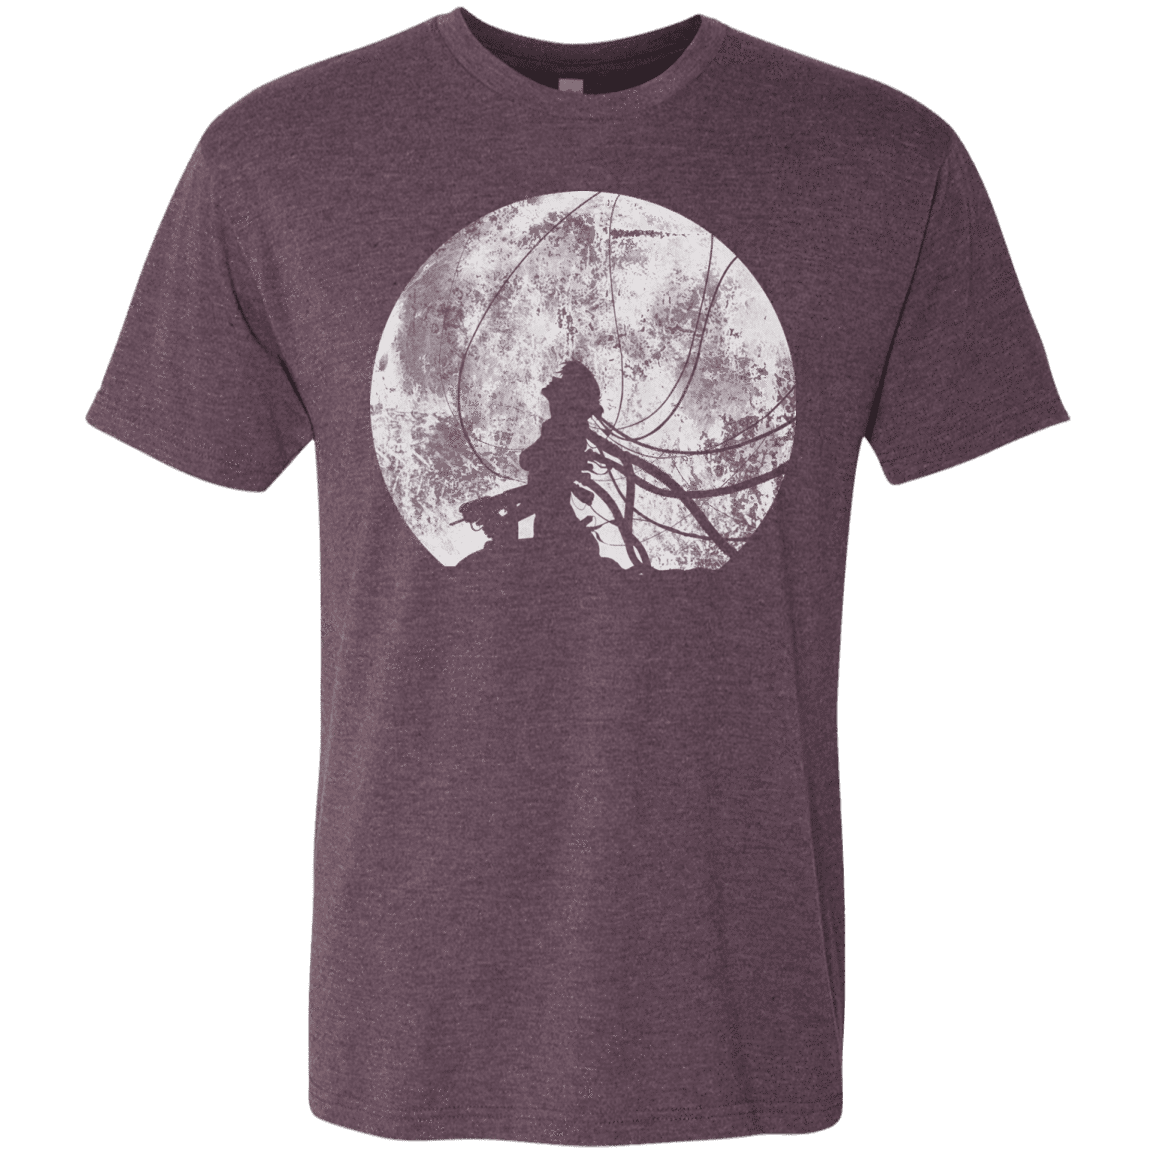 T-Shirts Vintage Purple / S Shell of a Ghost Men's Triblend T-Shirt